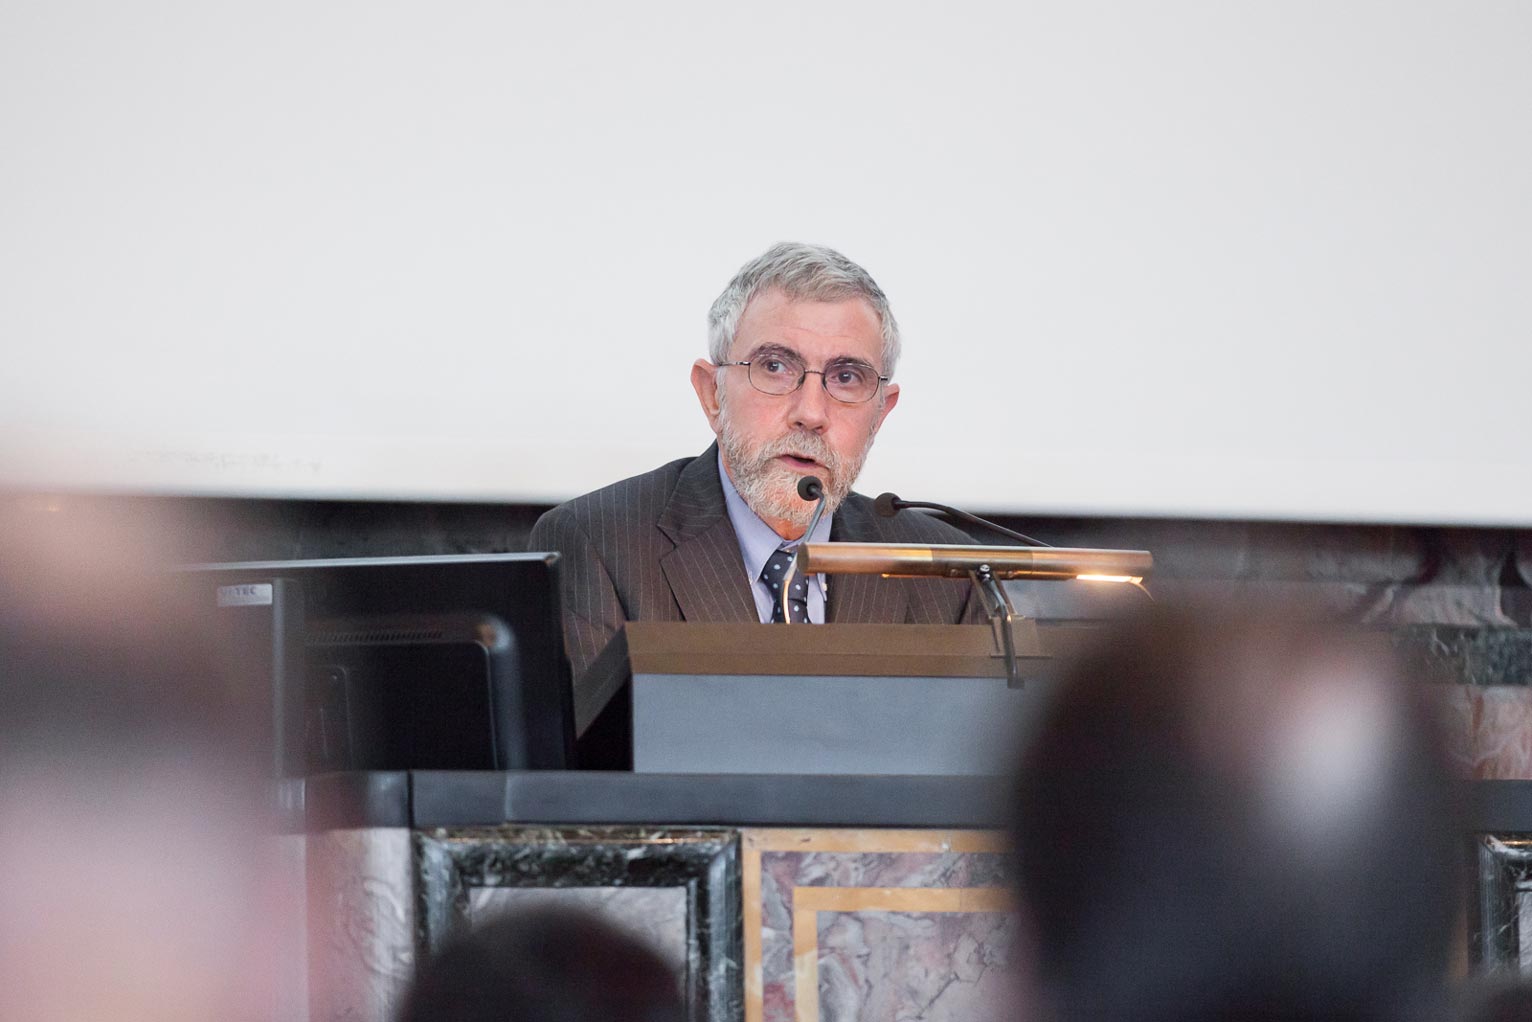 Paul Krugman received the Nobel Memorial Prize in Economic Sciences for his work on international trade theory in 2008.